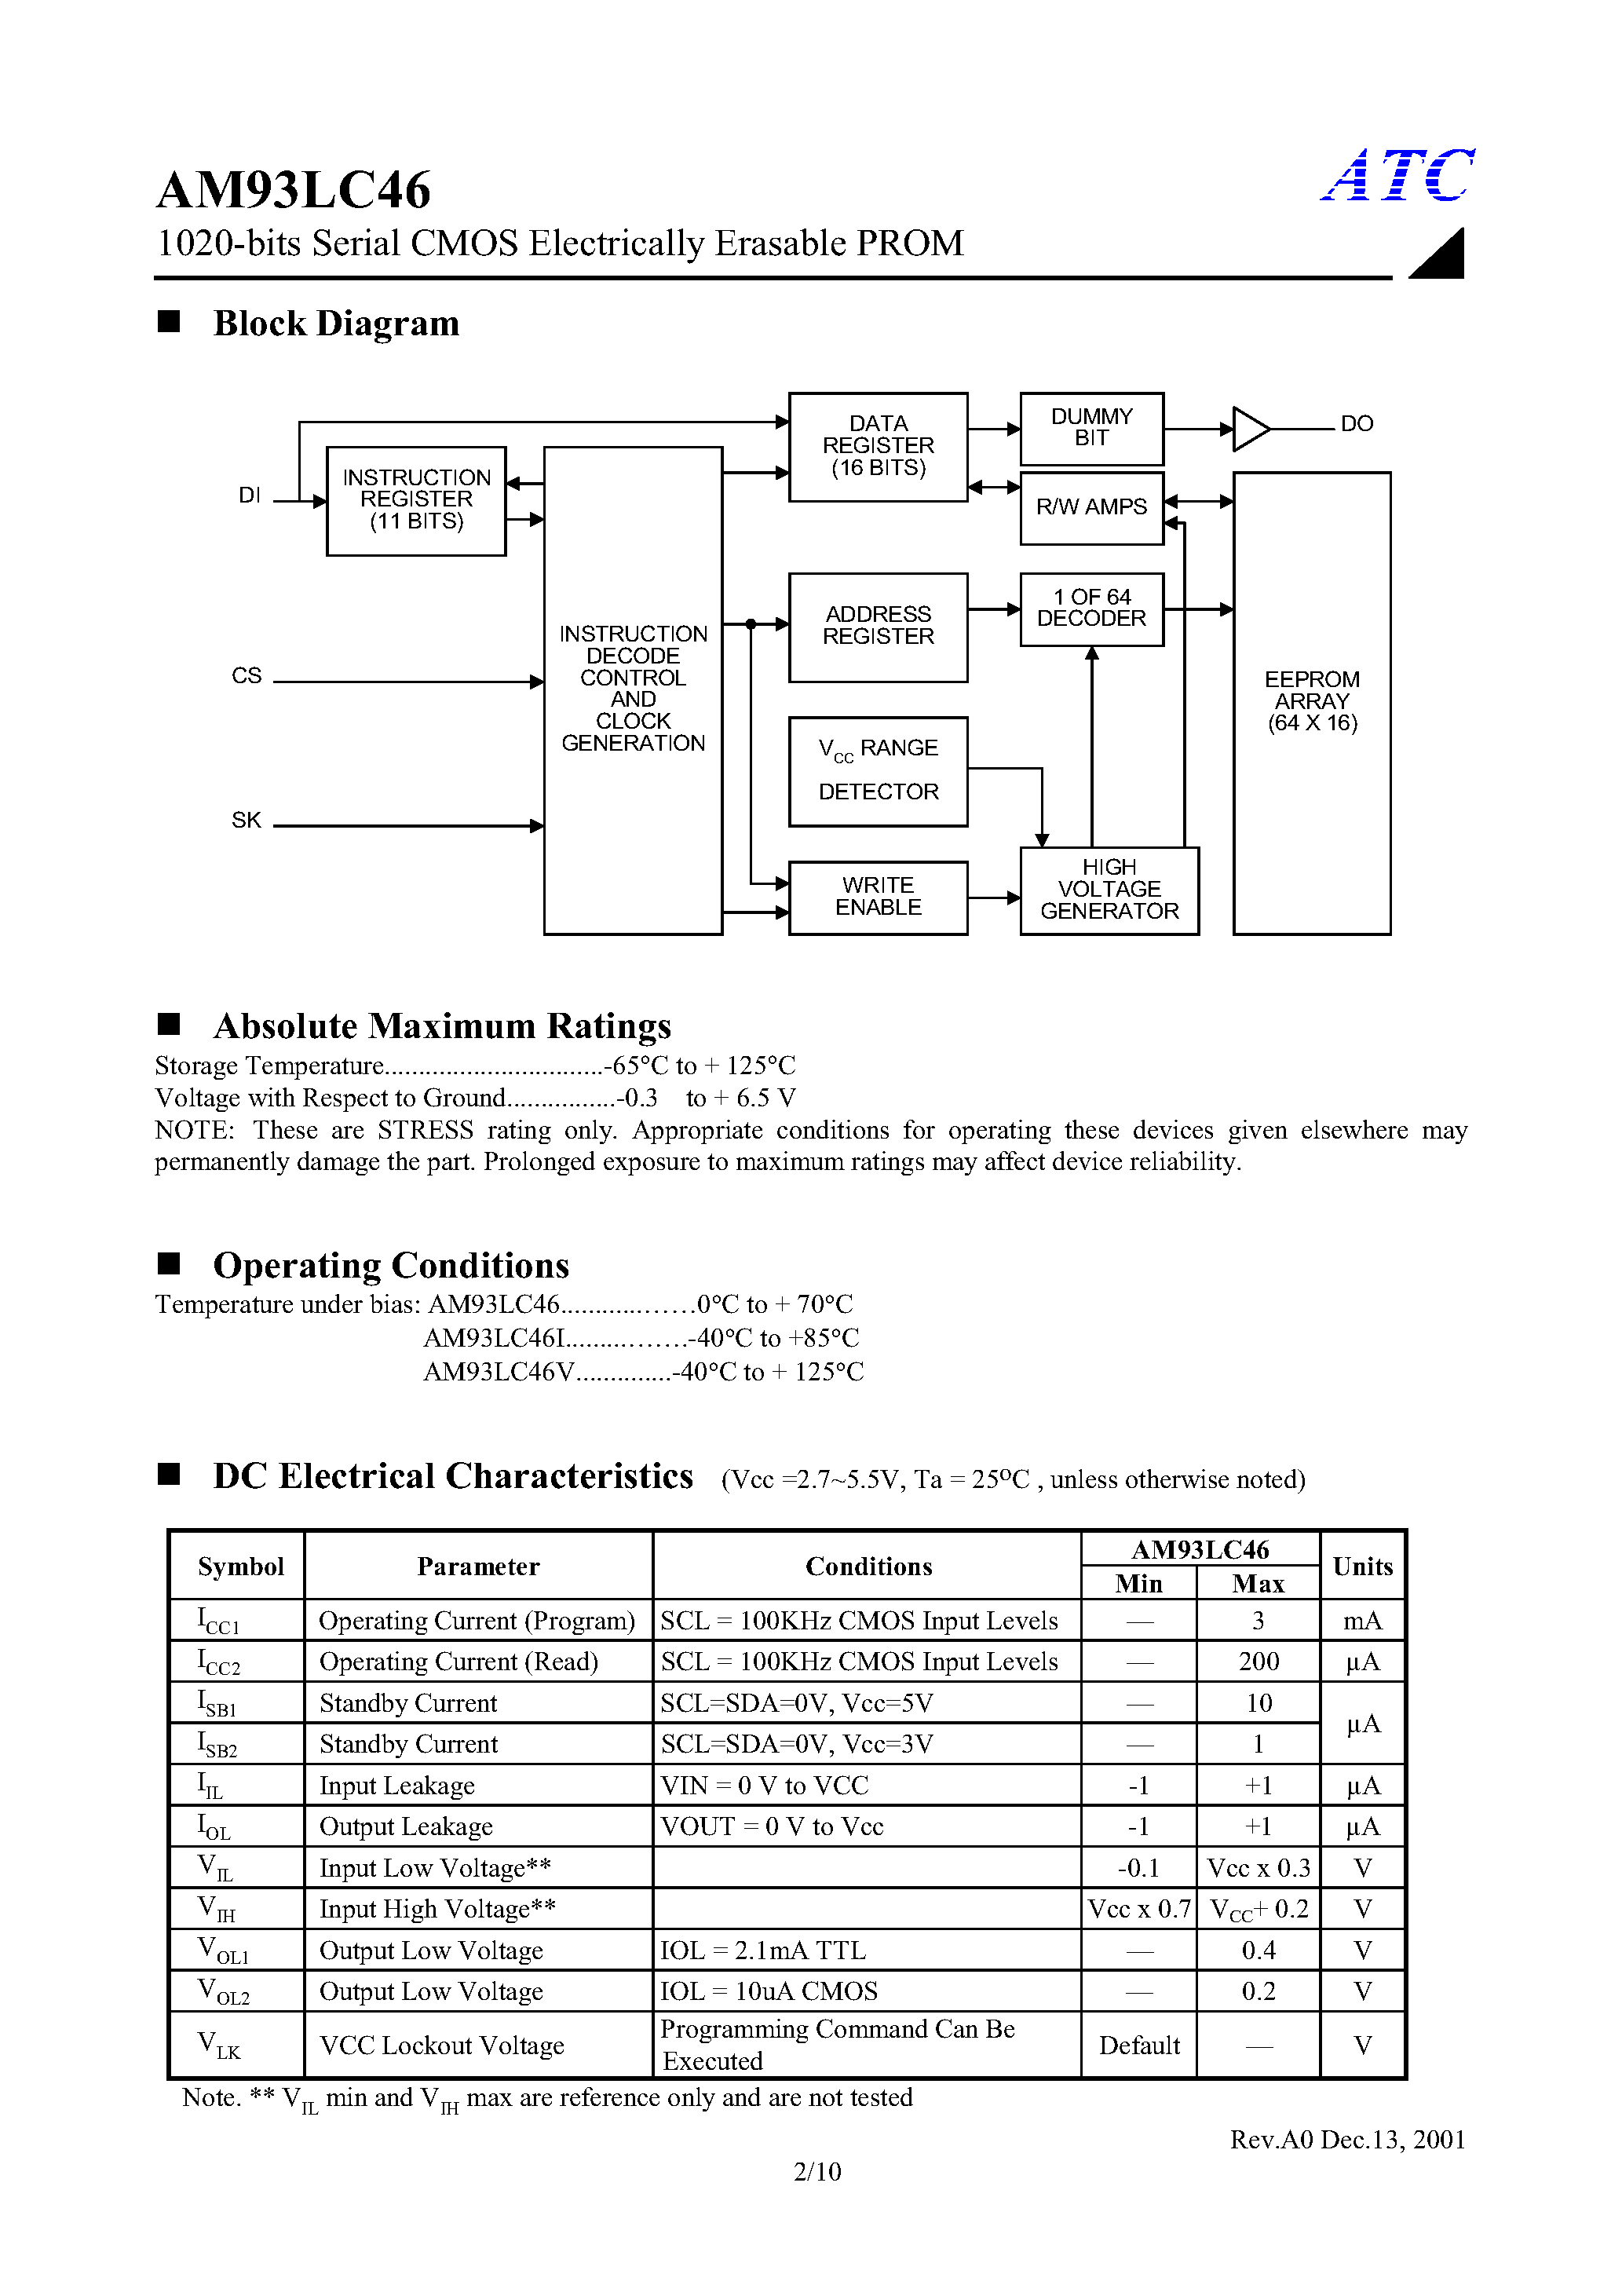 Datasheet AM93LC46IN8A - 1024-bits Serial Electrically Erasable PROM page 2